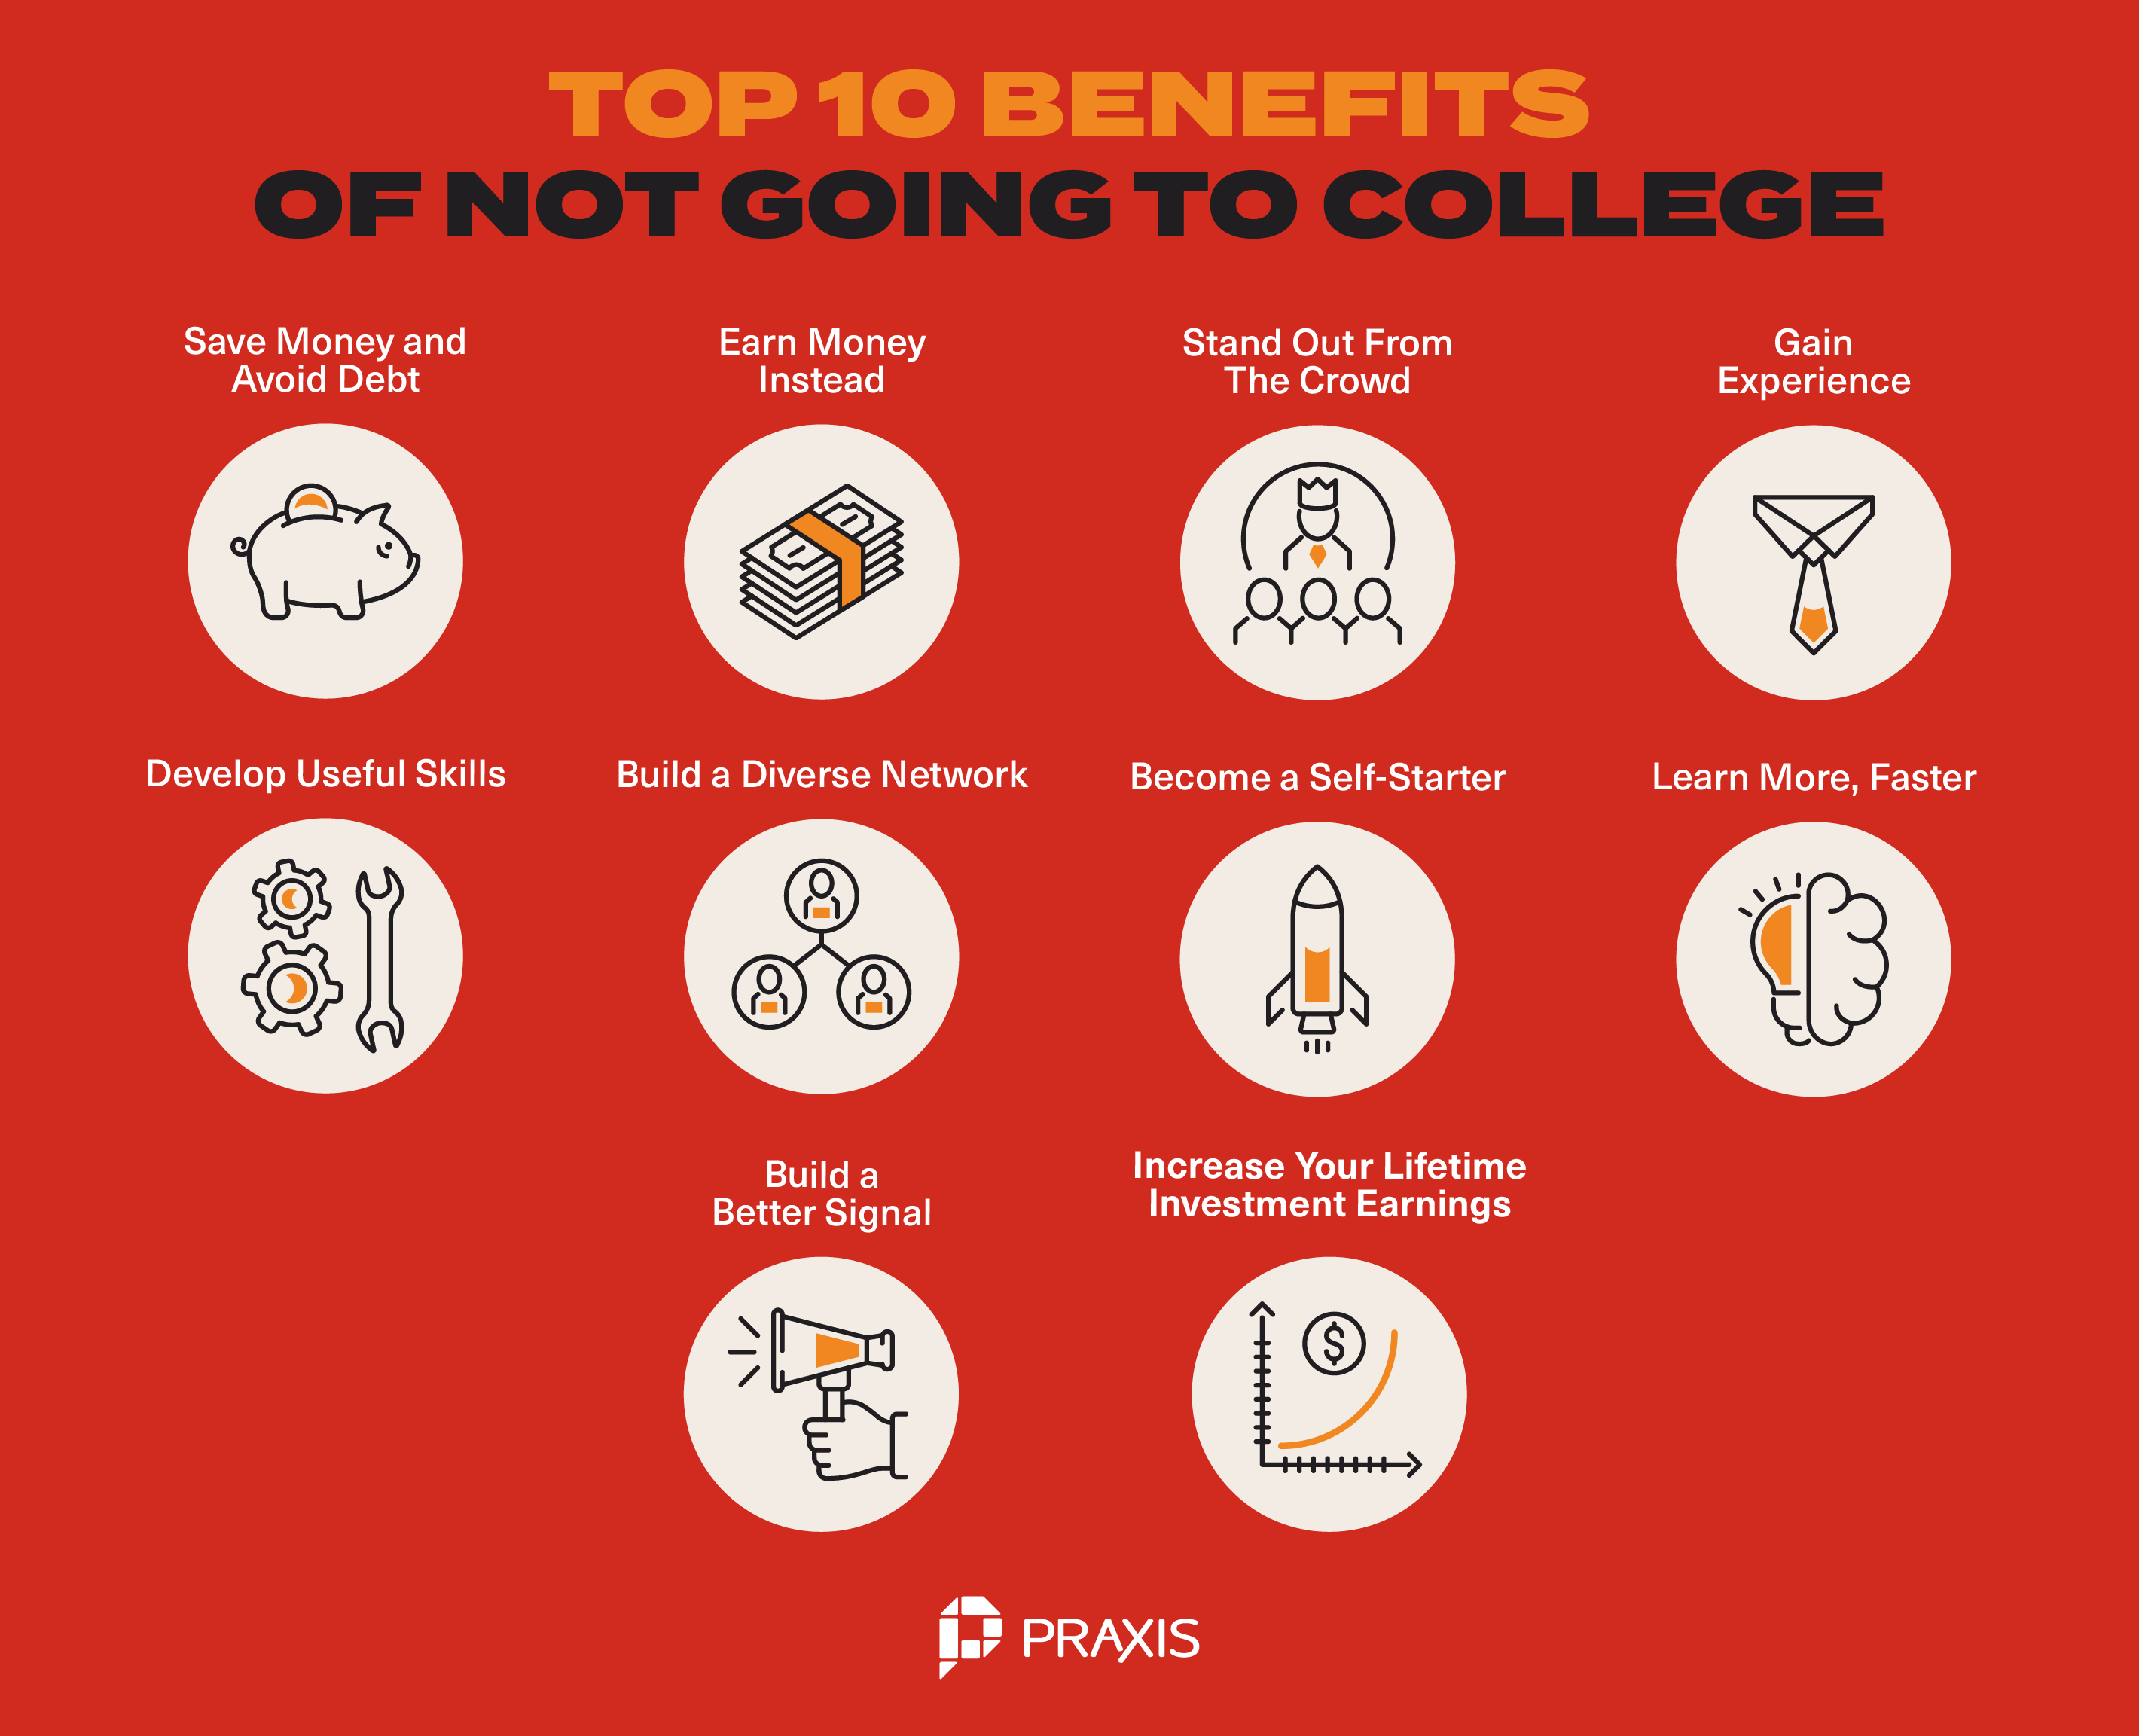 Top 10 Benefits of Not Going to College